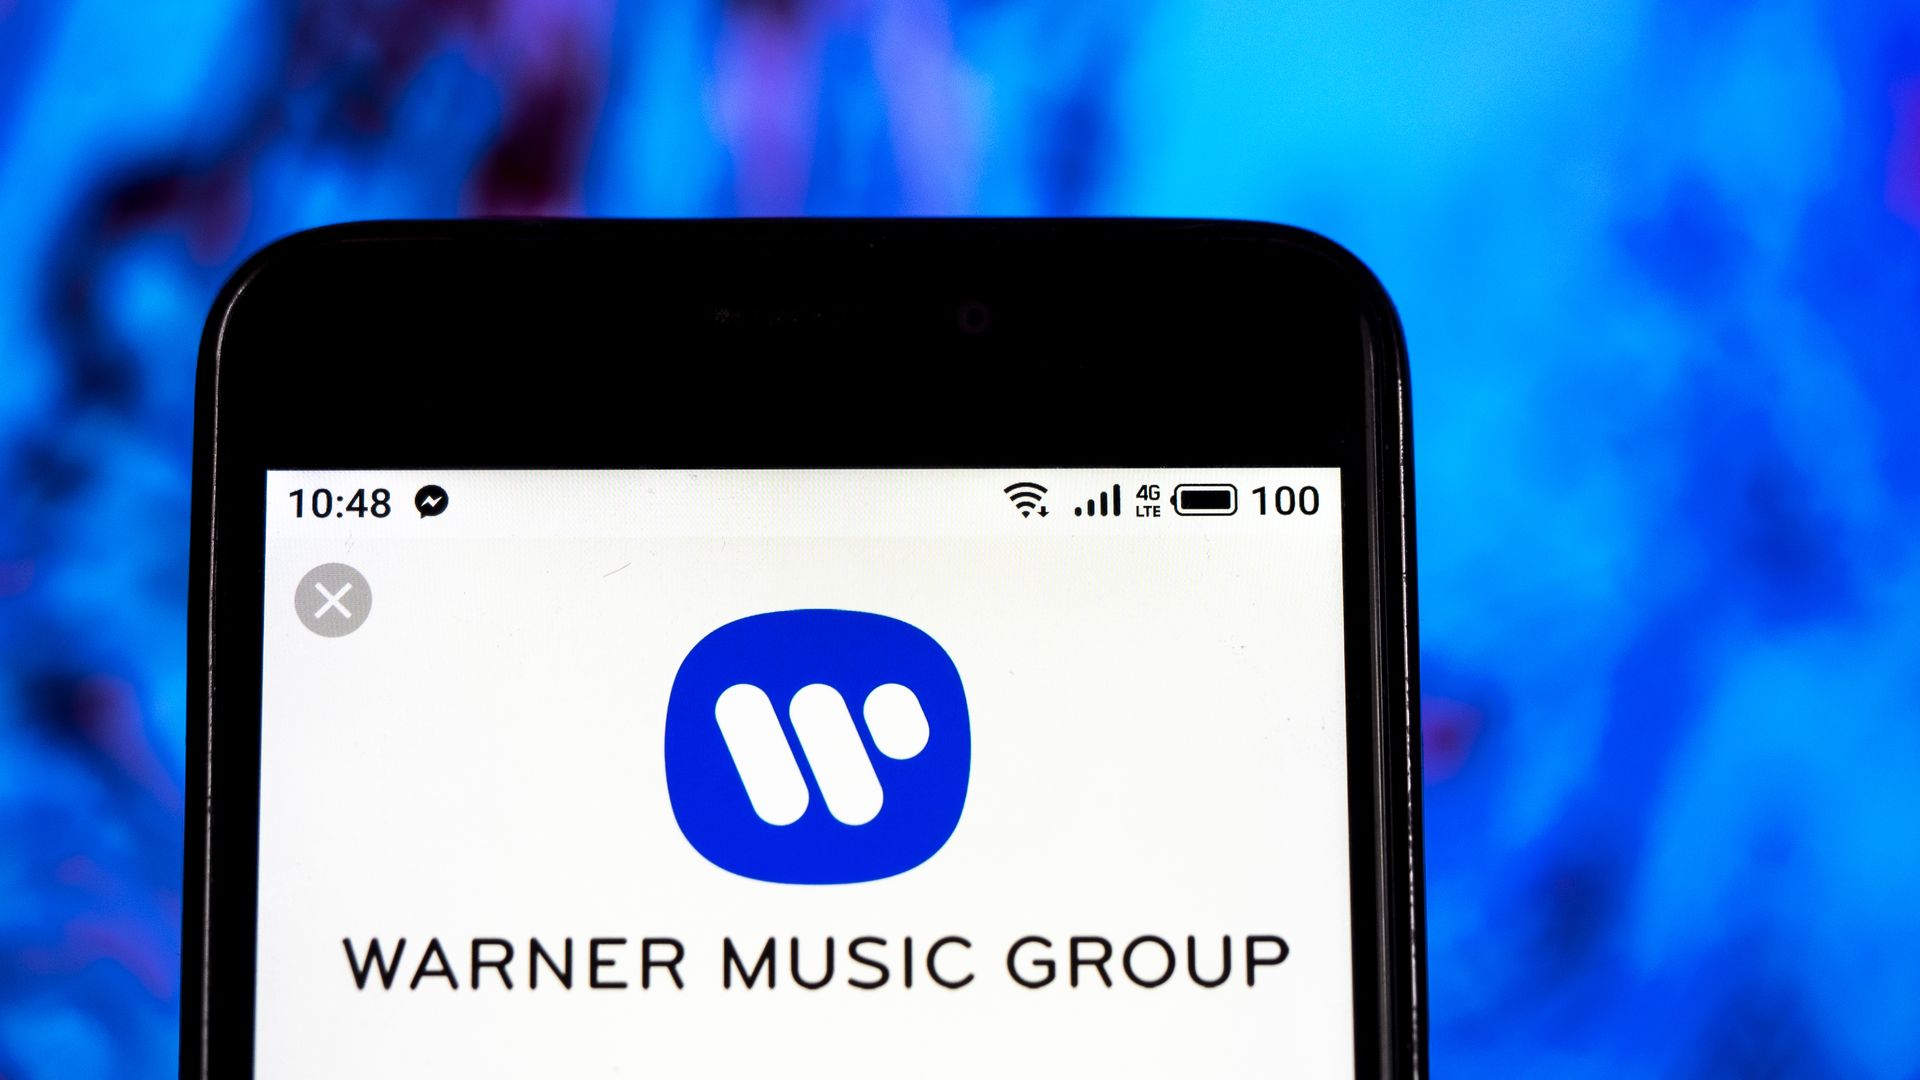 In this image, Warner Music Group logo is displayed on an iphone.